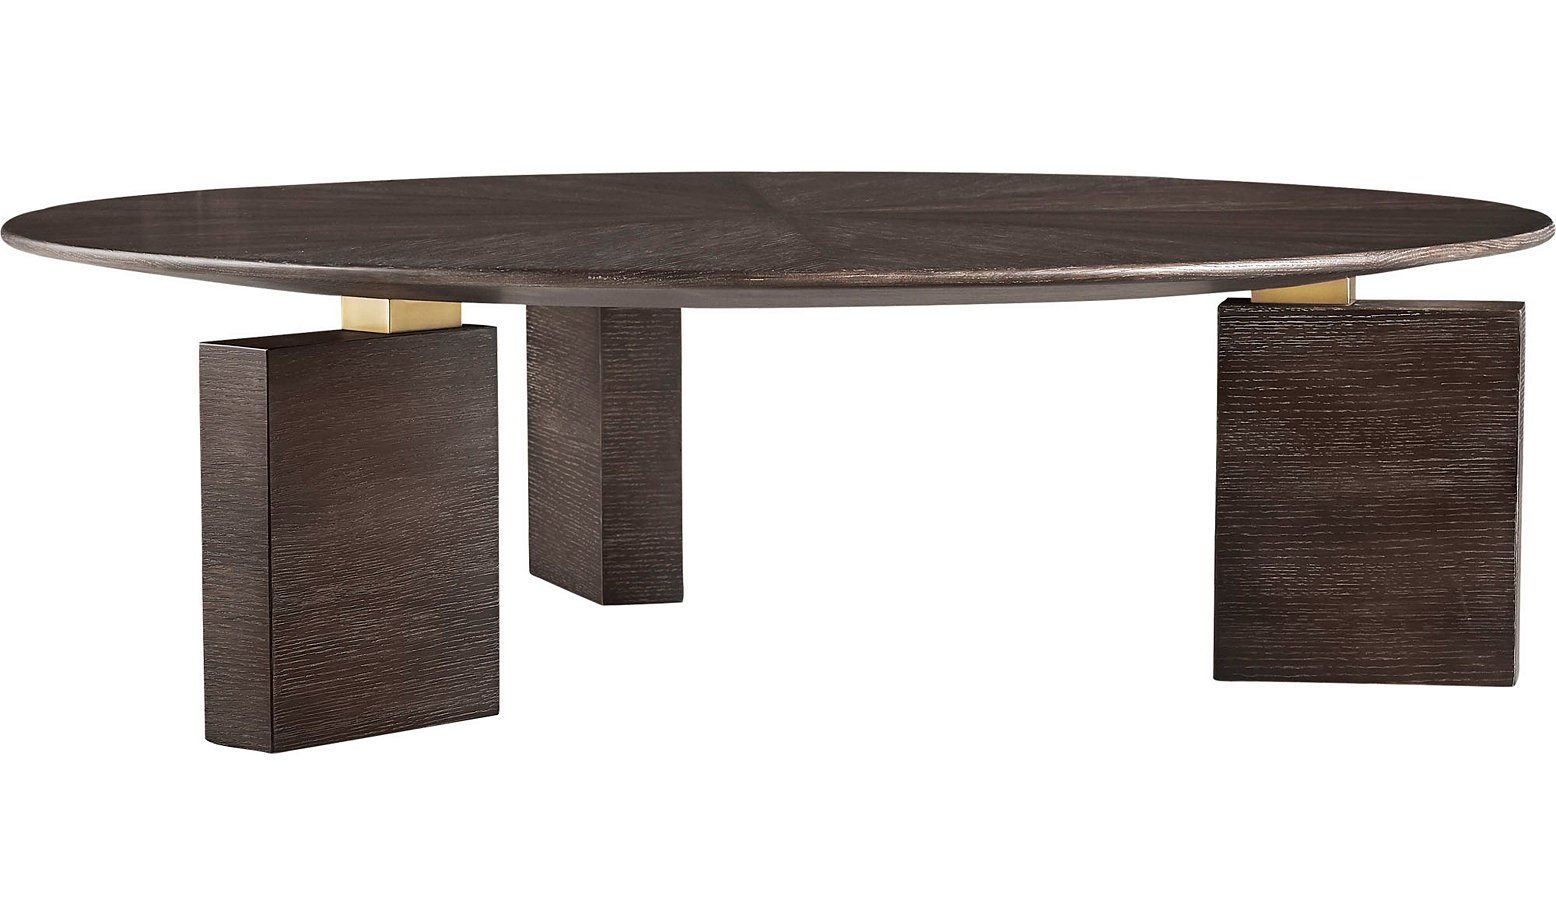 TRILOGY COCKTAIL TABLE